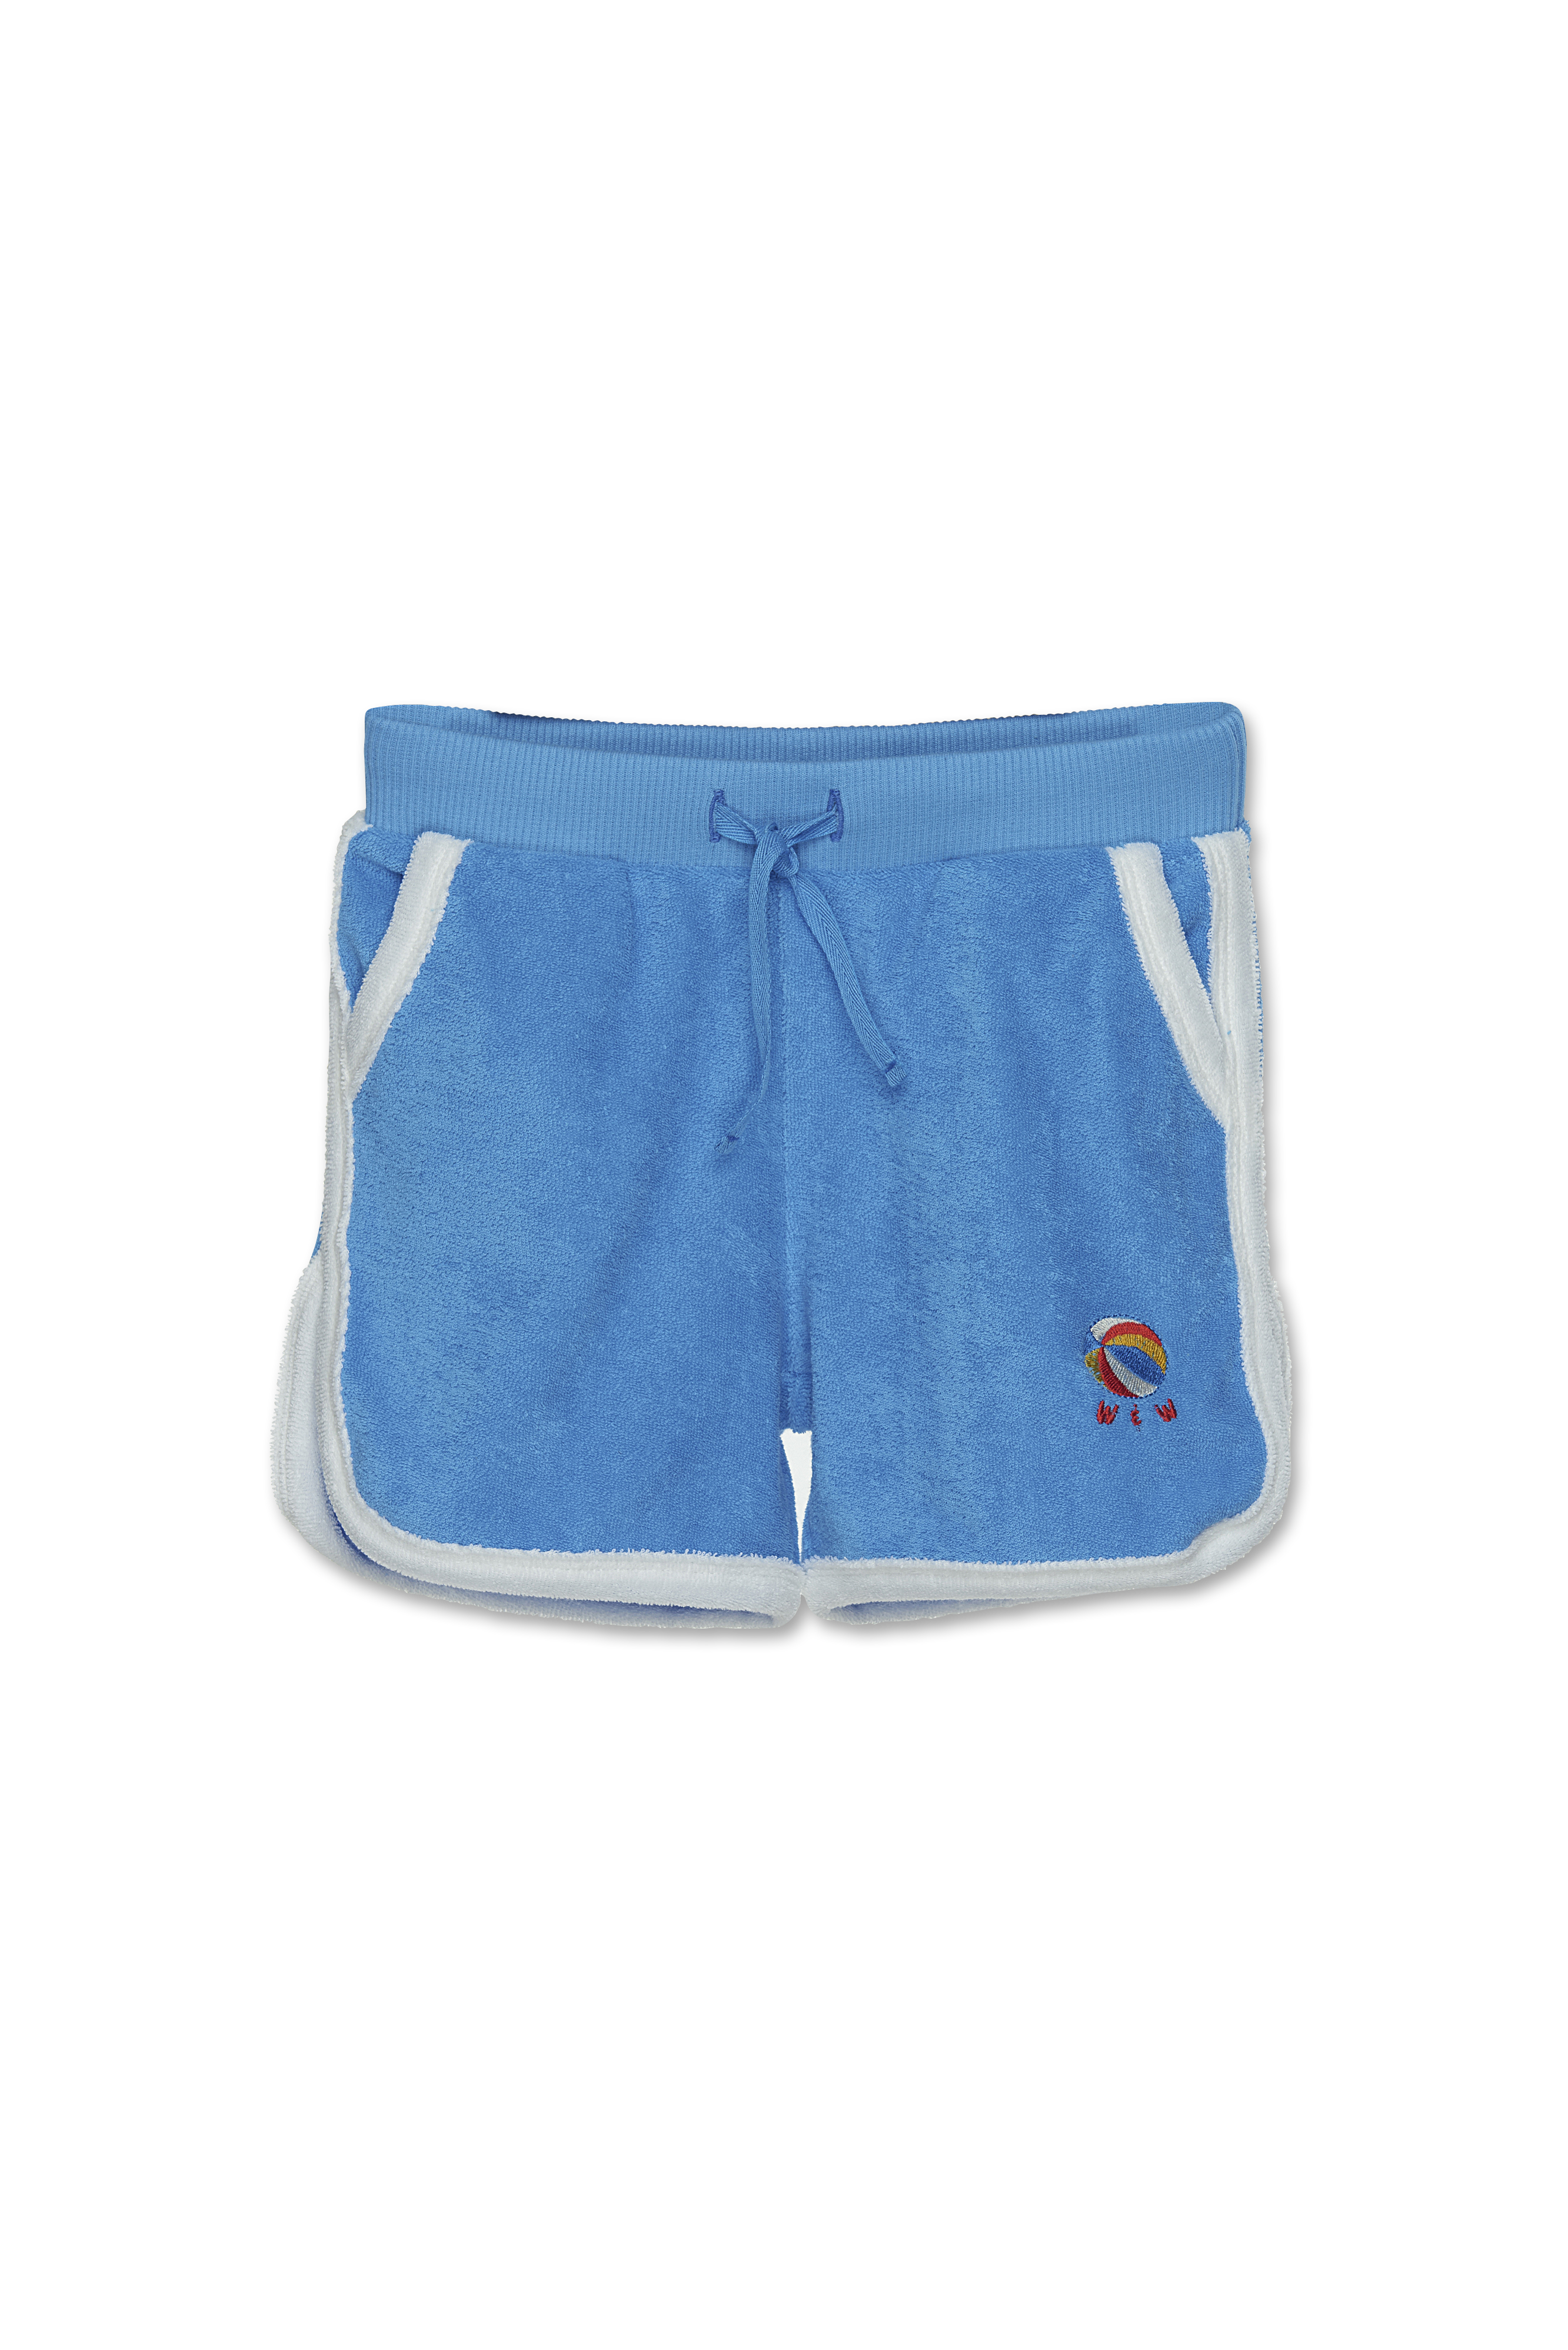 Wander and Wonder - terry gym shorts - sky terry